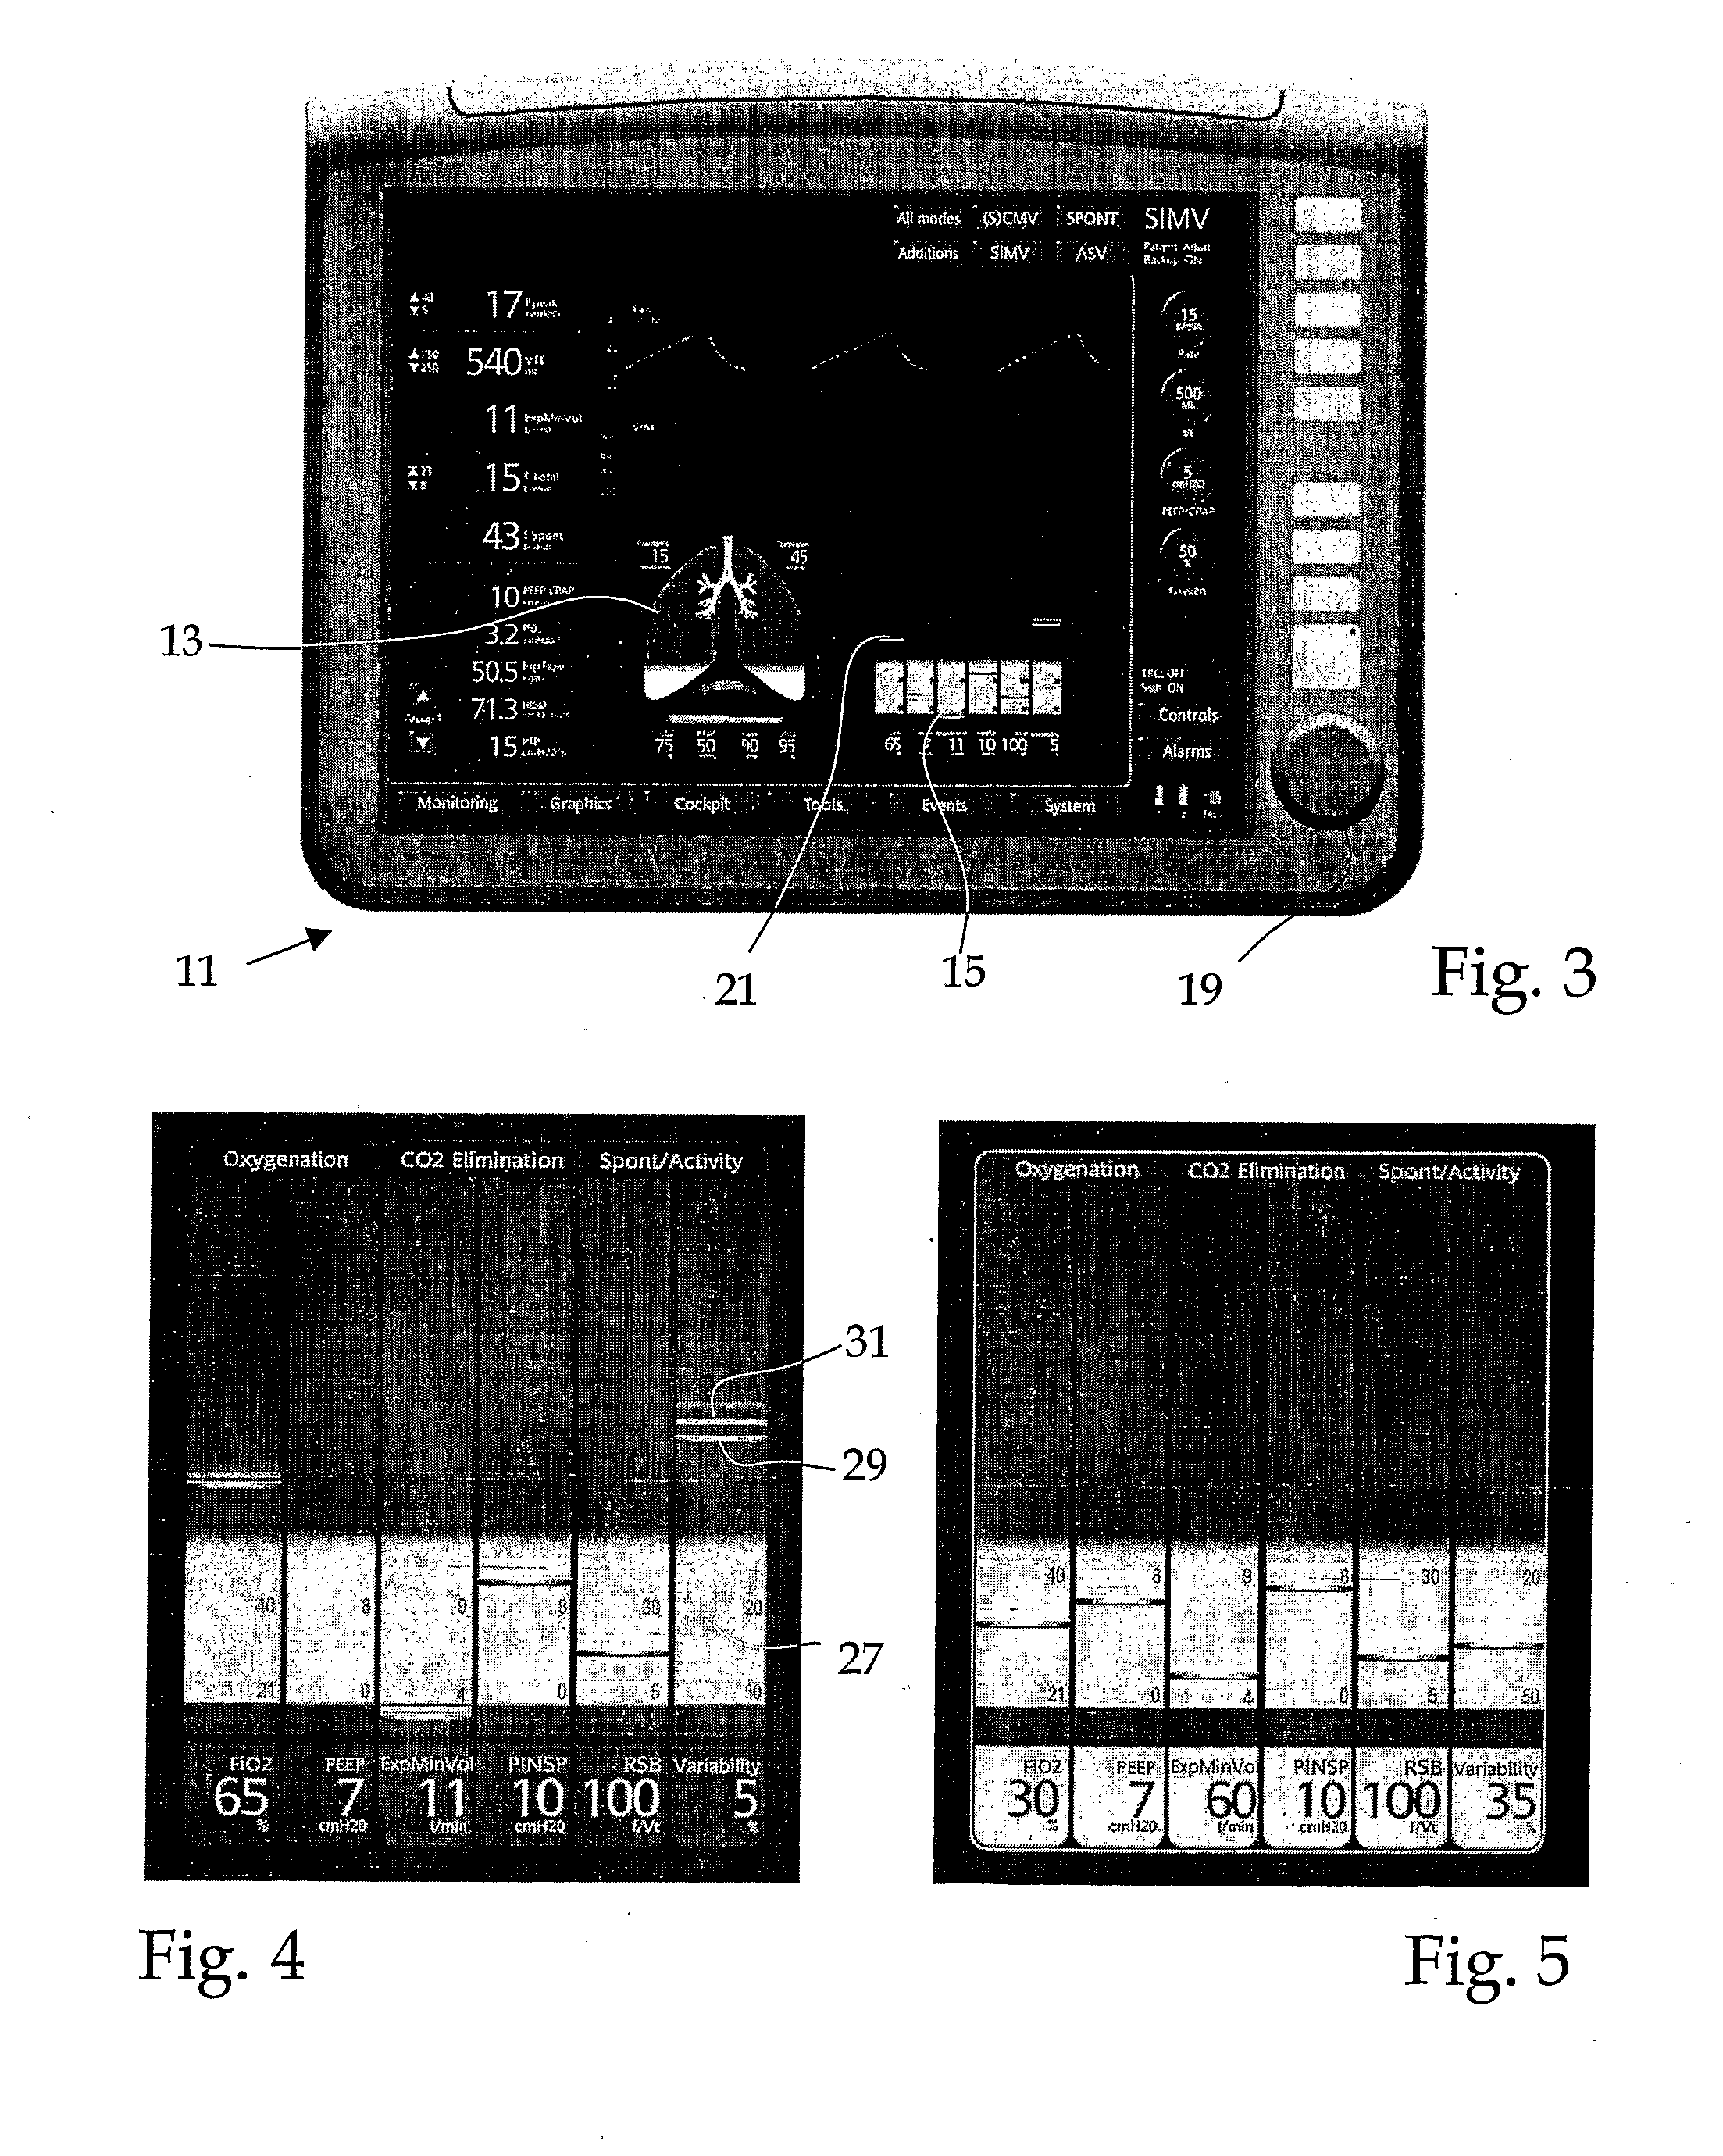 Method and a device for simplifying a diagnostic assessment of a mechanically ventilated patient